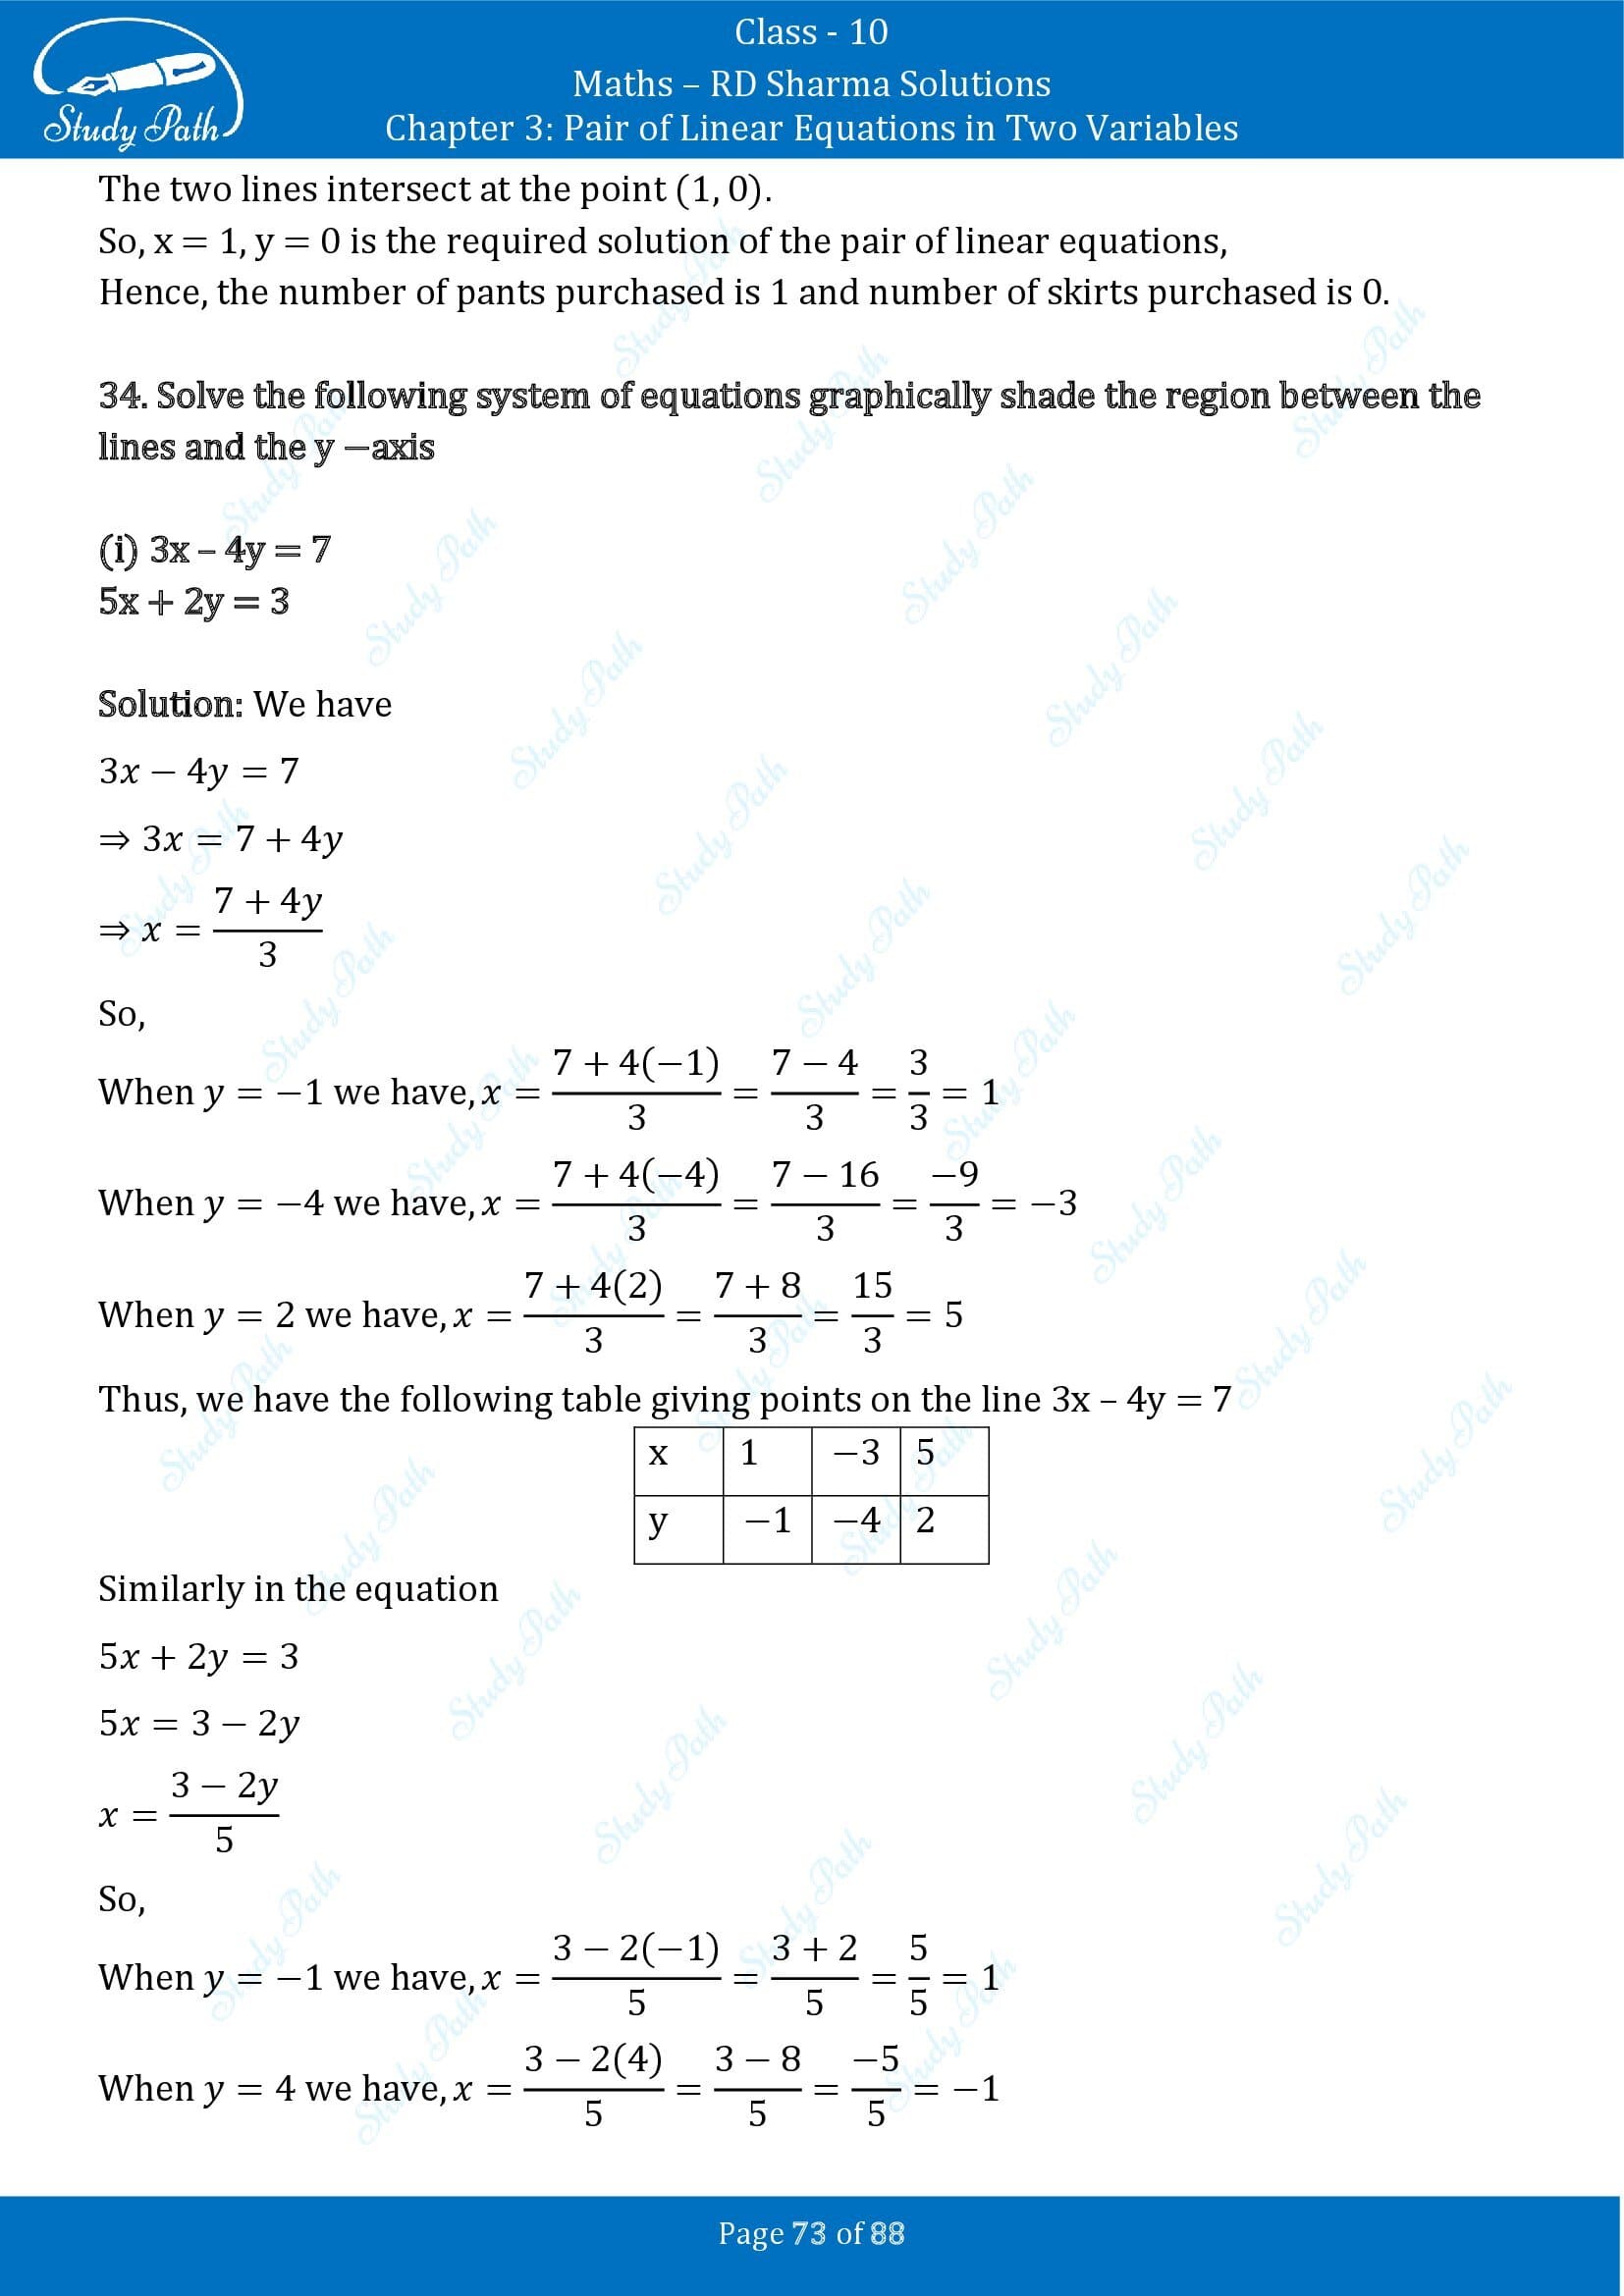 RD Sharma Solutions Class 10 Chapter 3 Pair of Linear Equations in Two Variables Exercise 3.2 00073